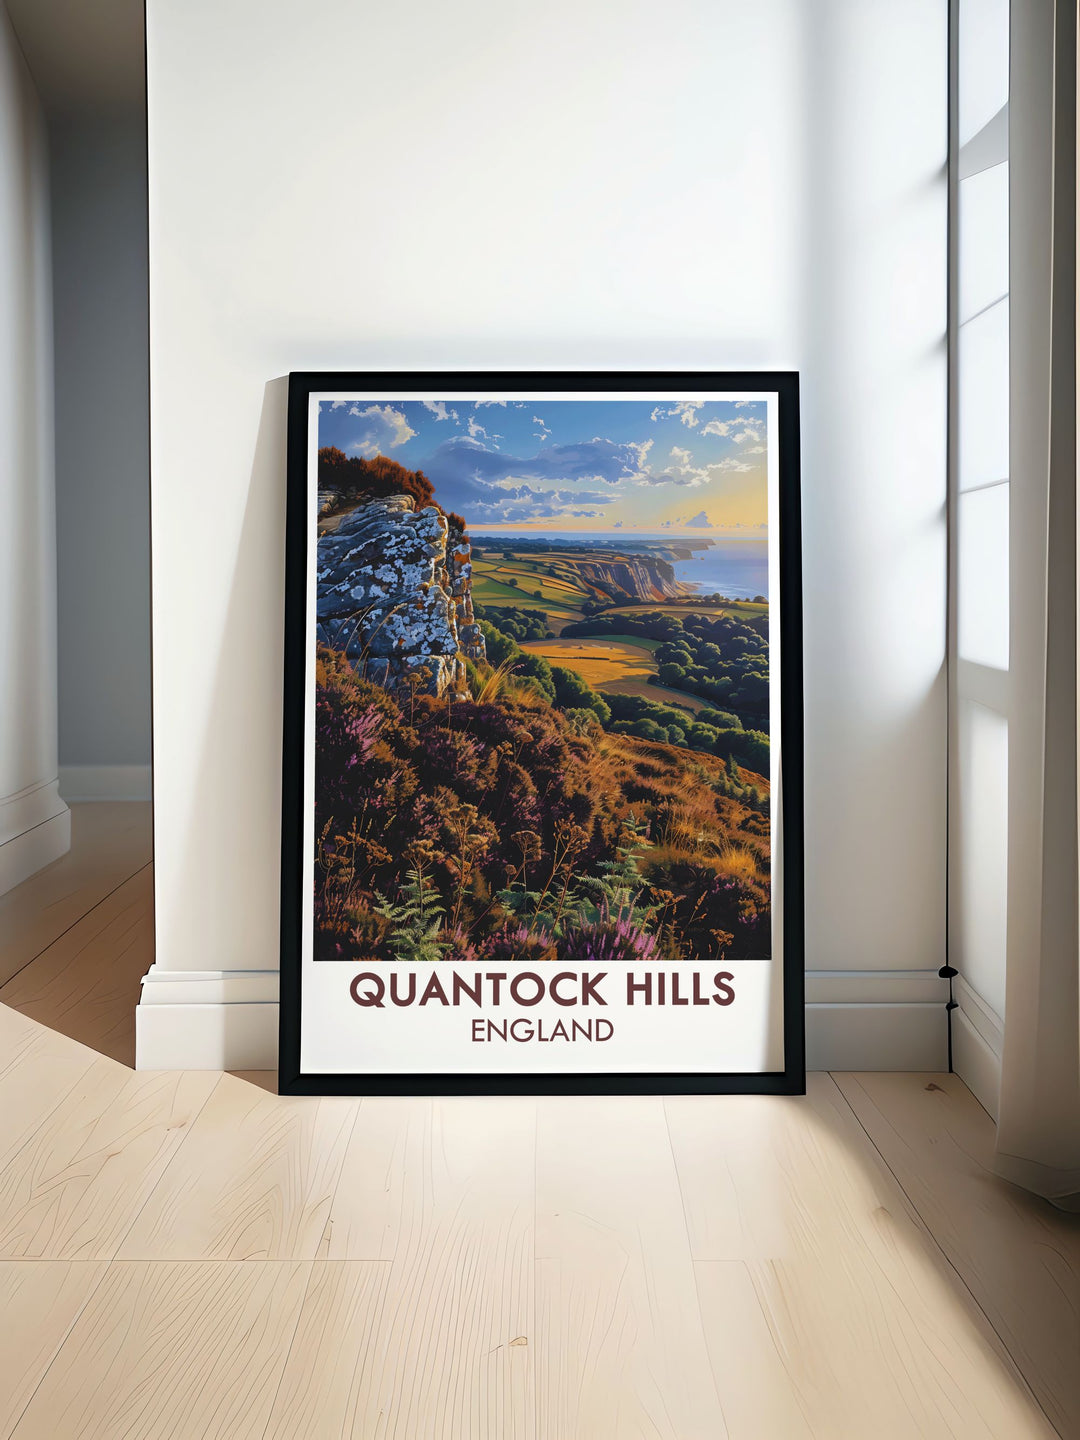 Wills Neck vintage travel print showcasing the serene beauty of Quantock Hills AONB and Somerset AONB perfect for home decor and travel enthusiasts who appreciate Somerset Travel Art and the picturesque views of Vale Taunton Deane and Quantock Heath.